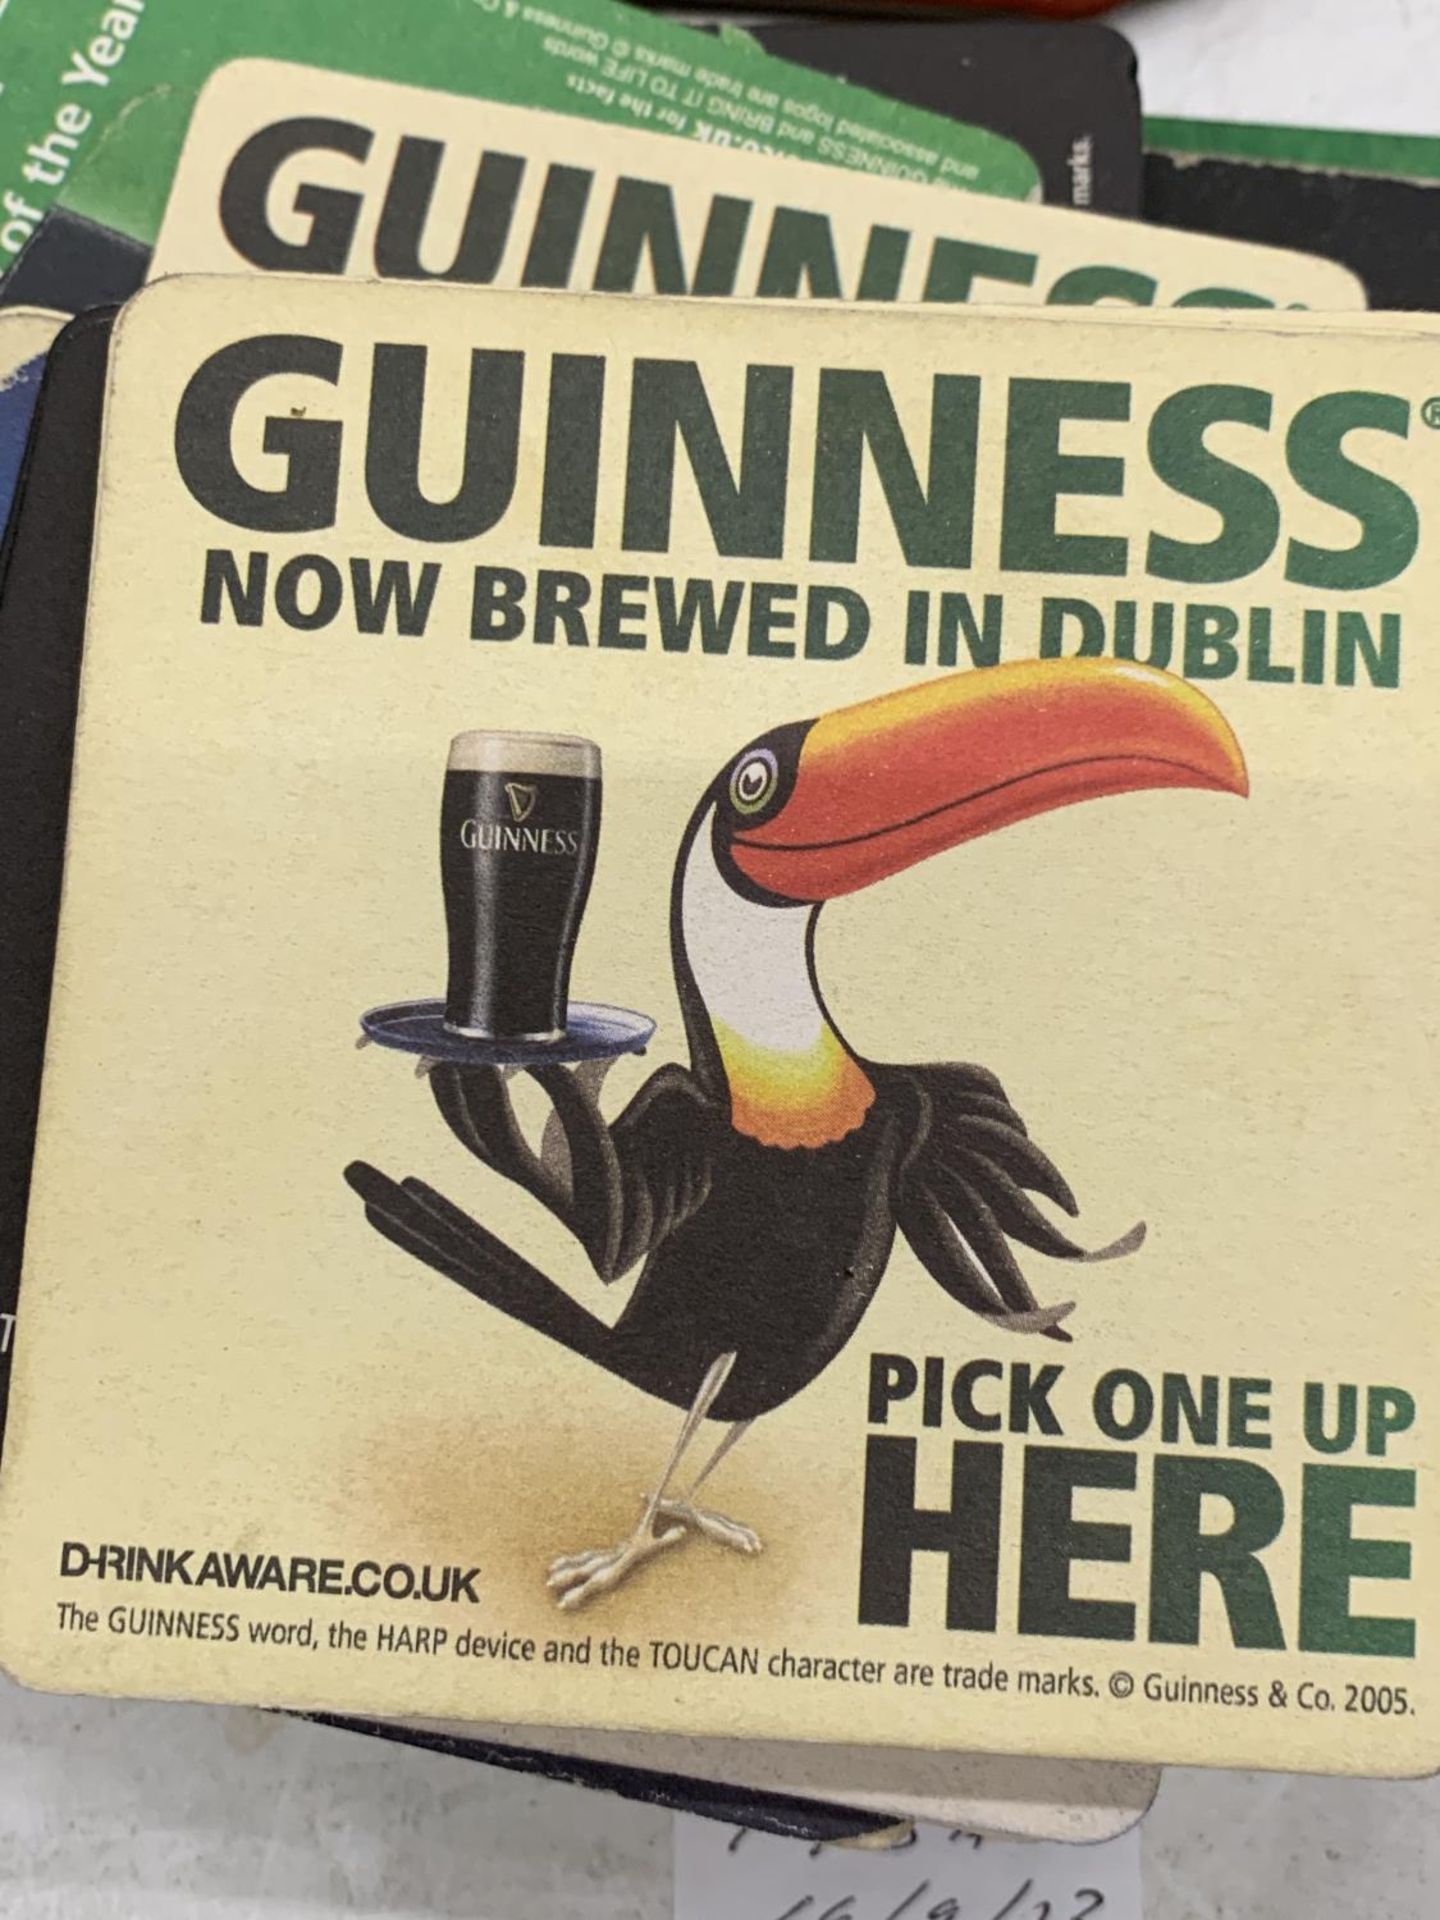 VARIOUS GUINNESS RELATED ITEMS - Image 4 of 4